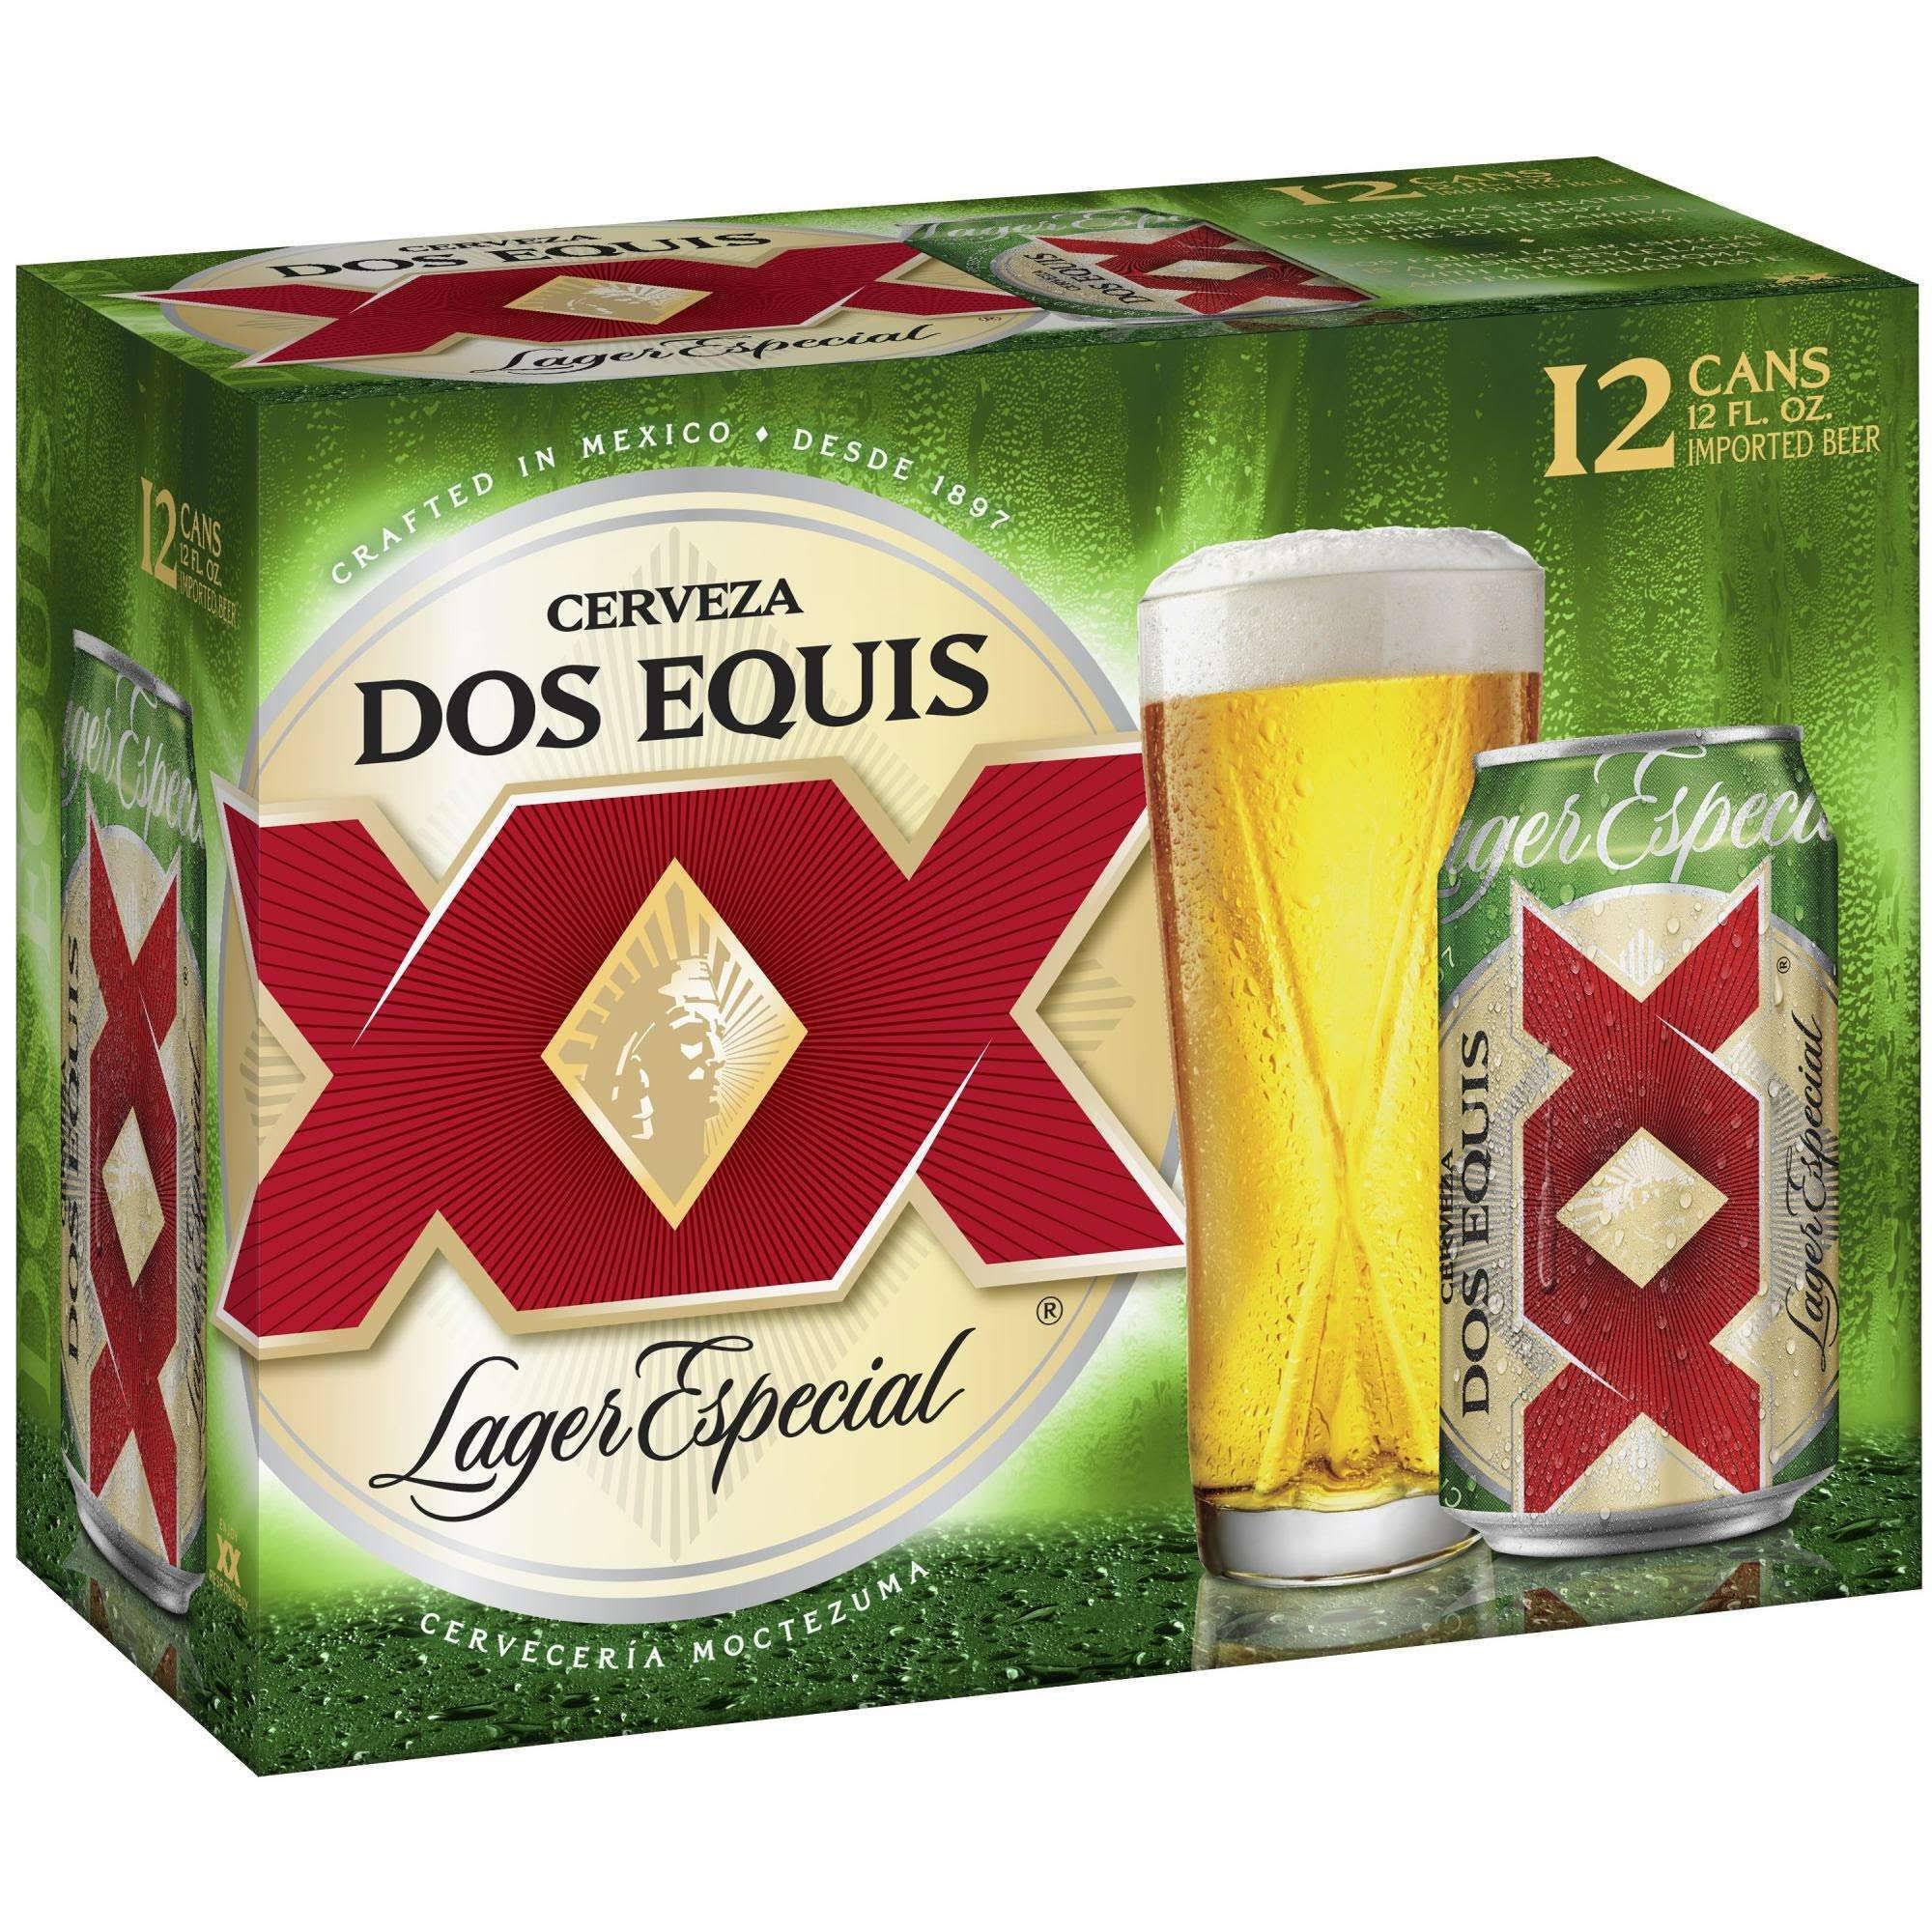 Dos Equis Lager Especial Beer - 12 Cans